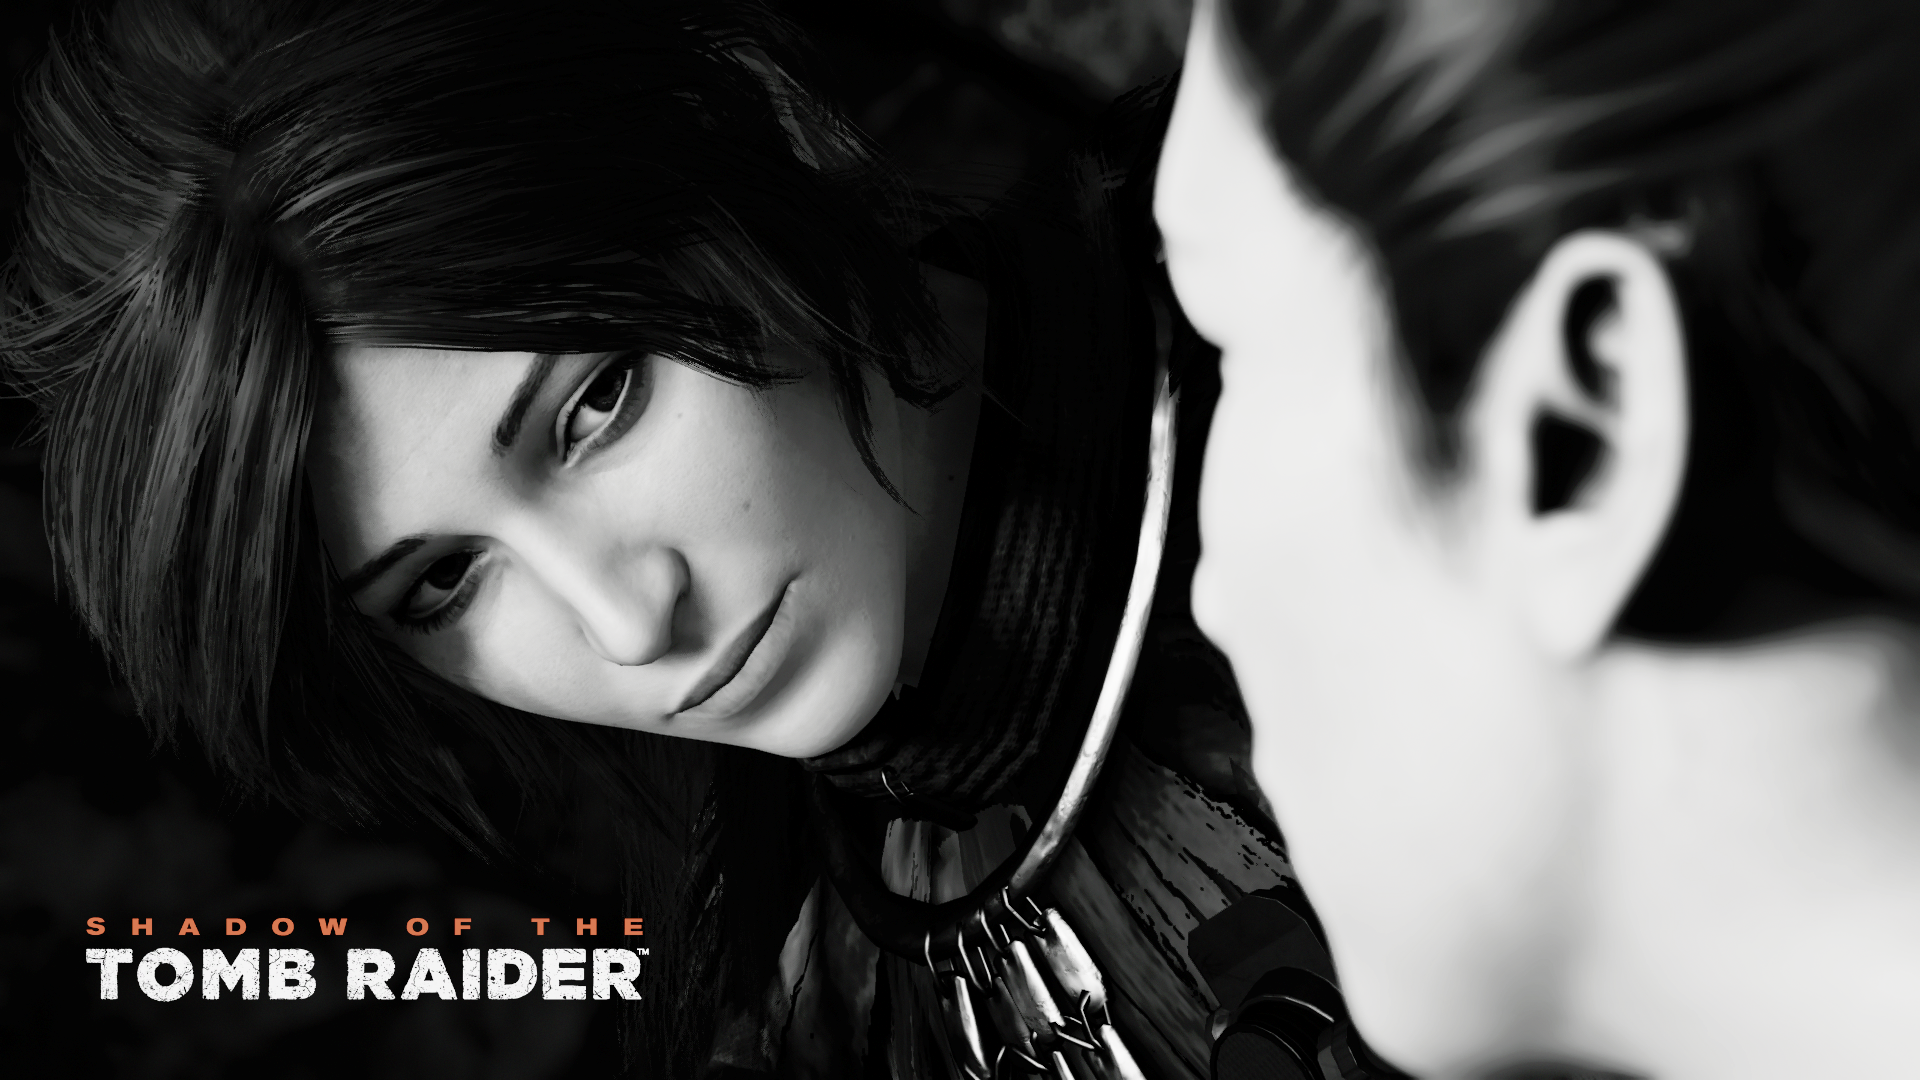 General 1920x1080 video games Lara Croft (Tomb Raider) Shadow of the Tomb Raider PC gaming video game girls face closeup video game characters